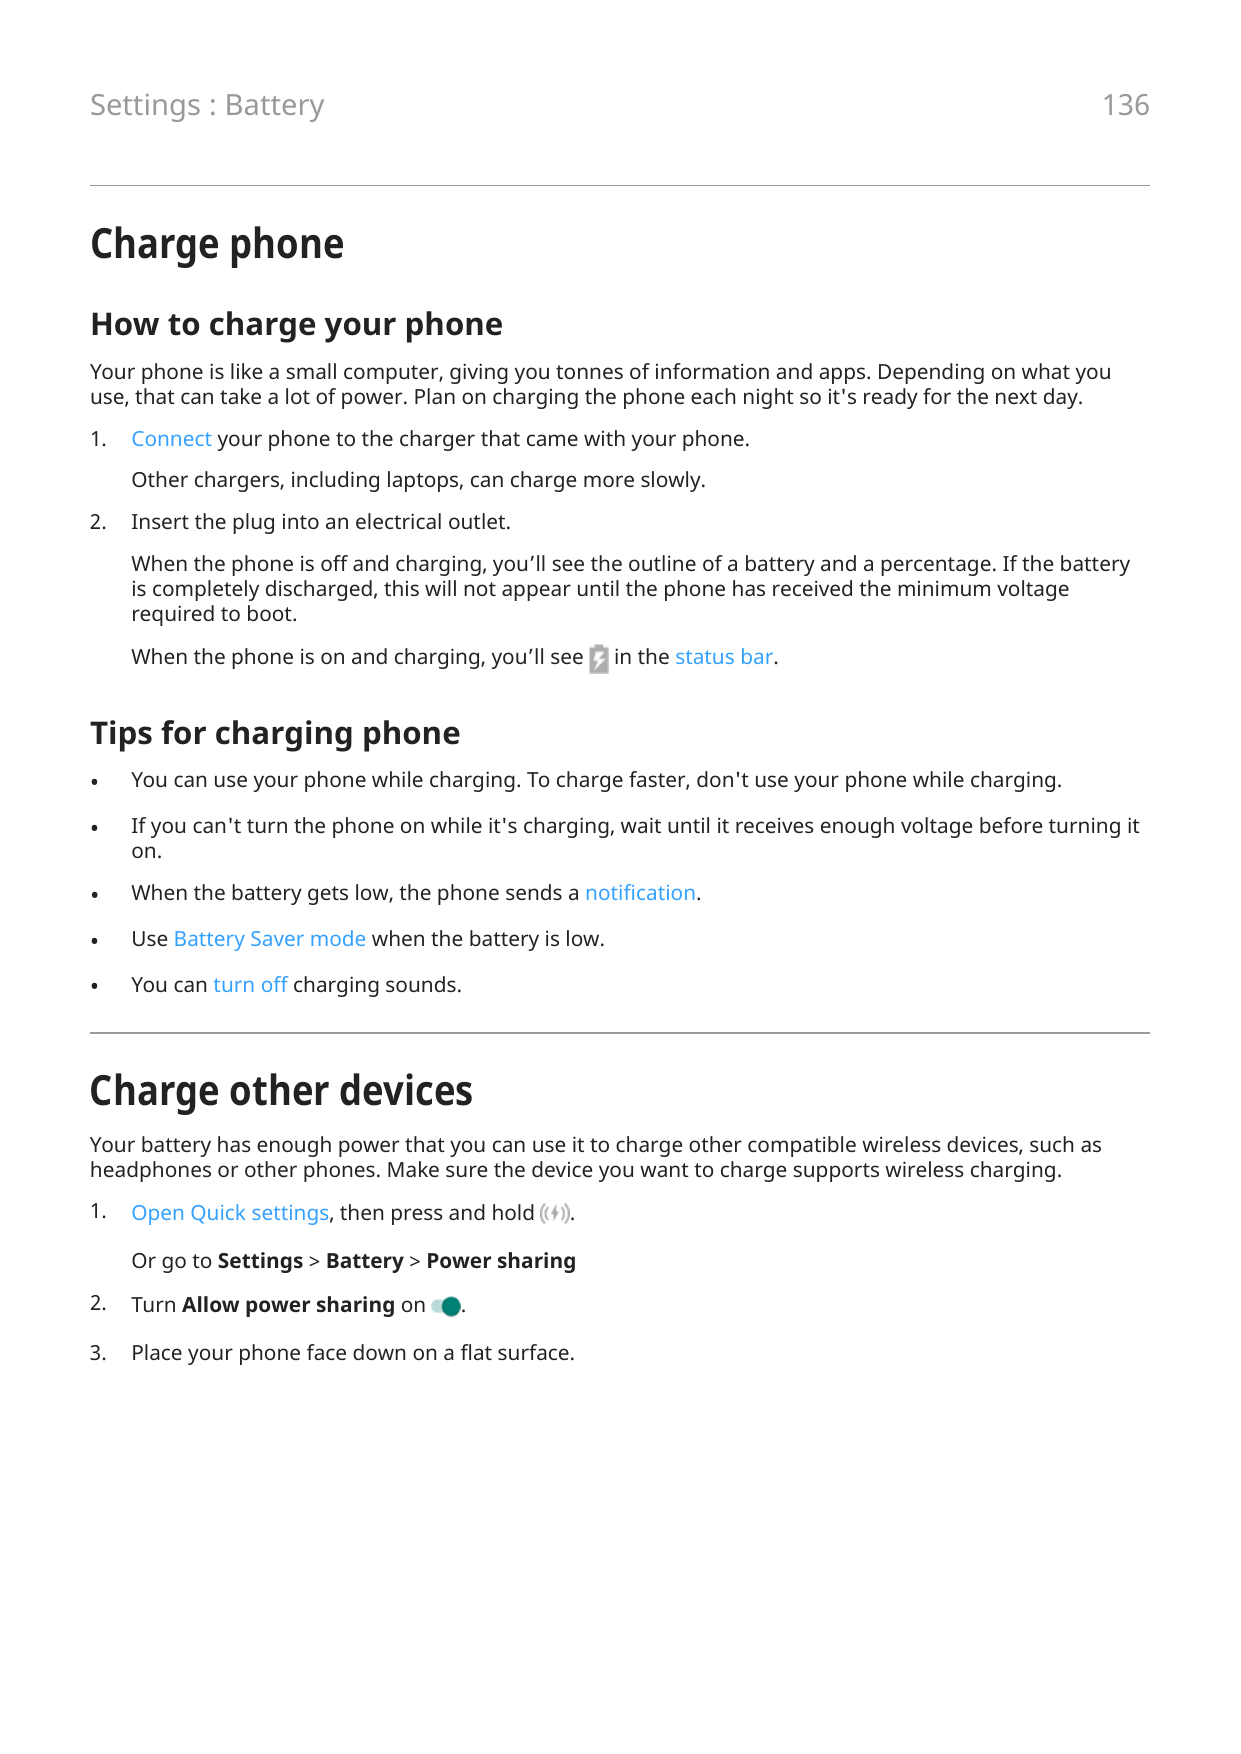 136Settings : BatteryCharge phoneHow to charge your phoneYour phone is like a small computer, giving you tonnes of information a